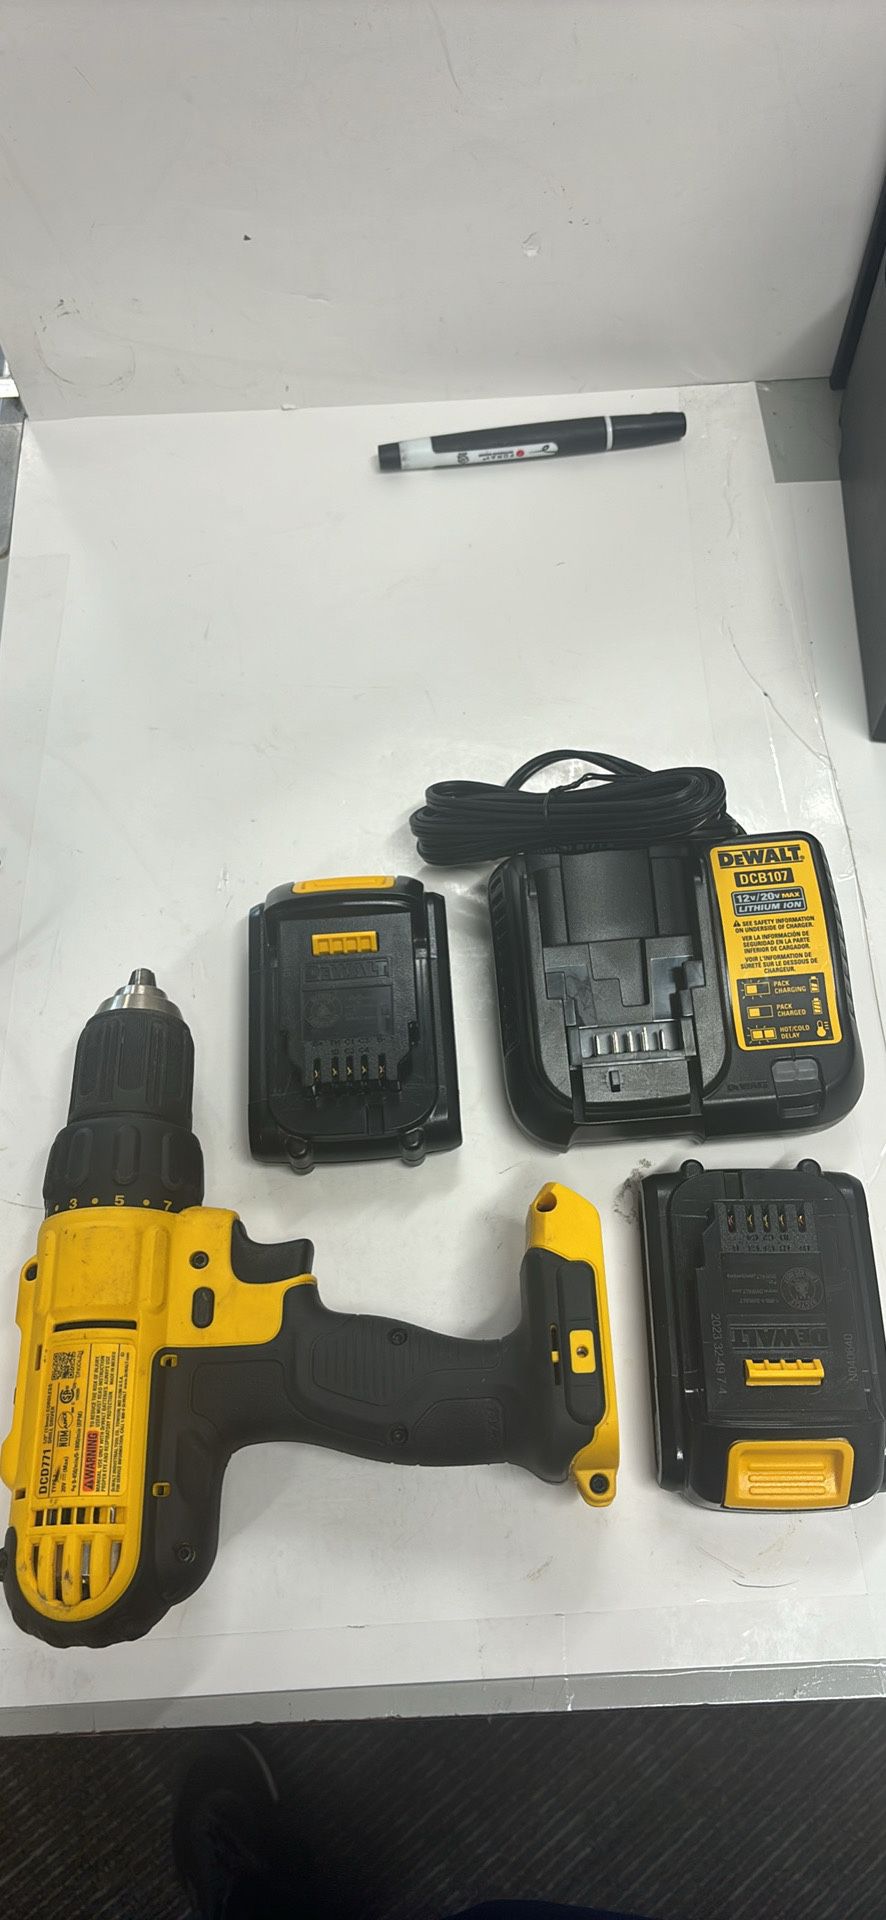 Dewalt 20 V Max 1/2 Inch Cordless Drill Driver Dcd771 With 2 Batteries And Charger